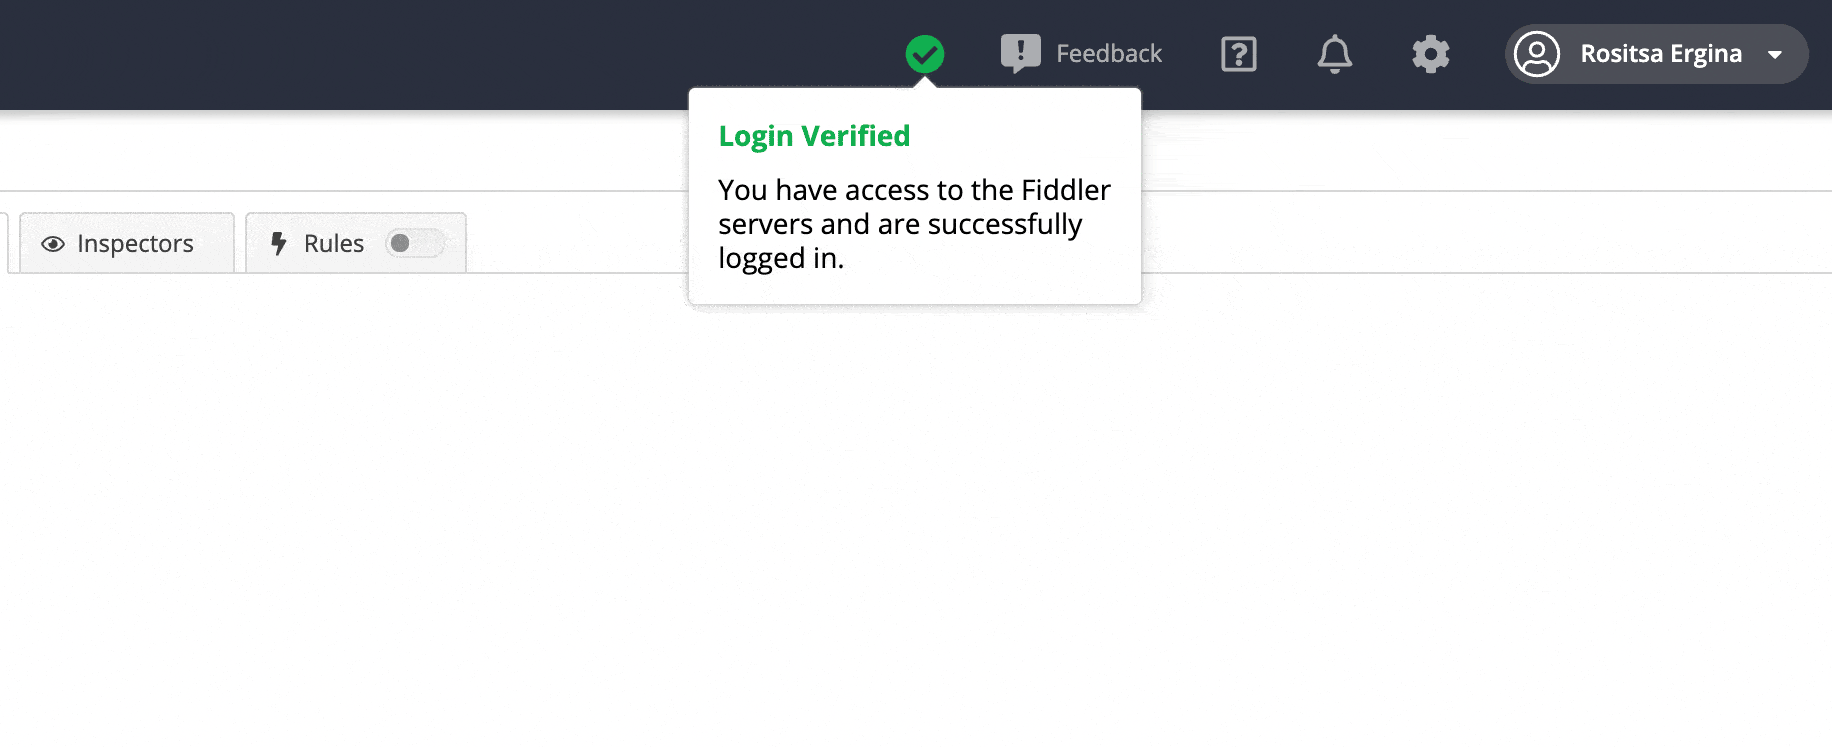 Login states show Verified login / Unable to refresh your login with a timer for how long you'll be able to work offline, counting down from 24 hours